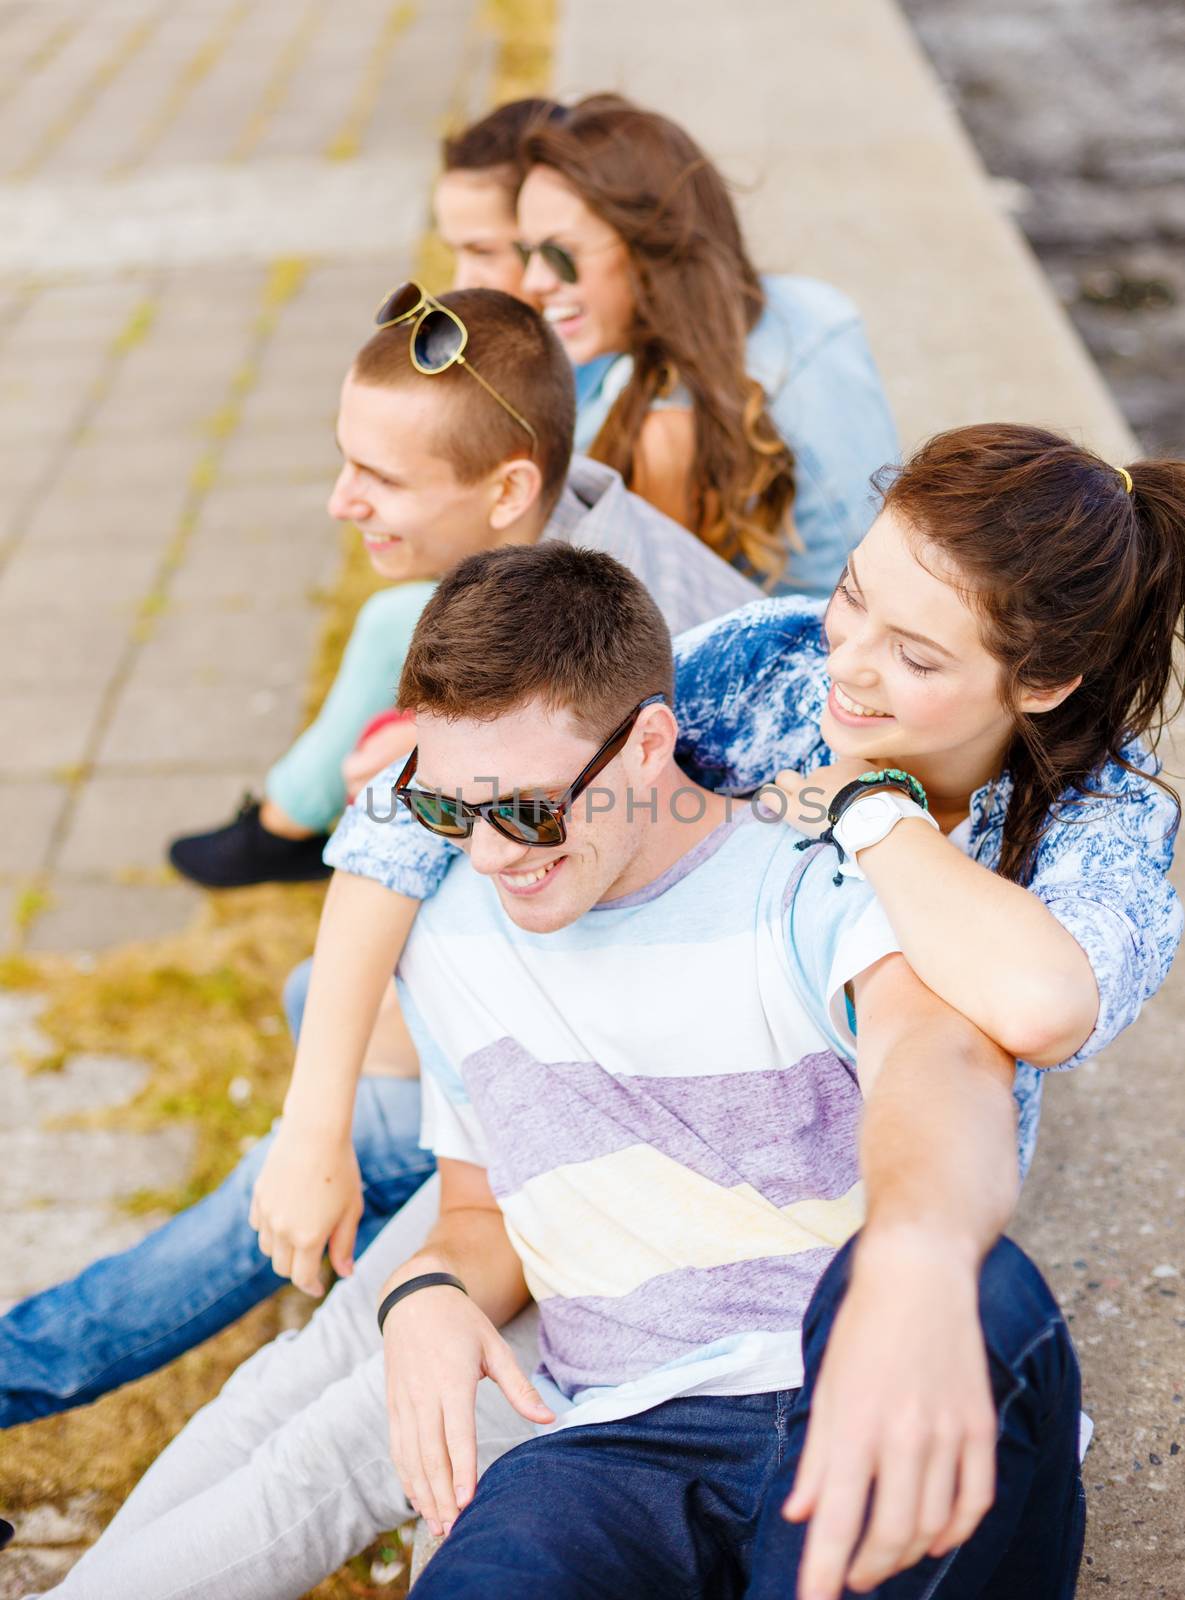 group of smiling teenagers hanging out by dolgachov